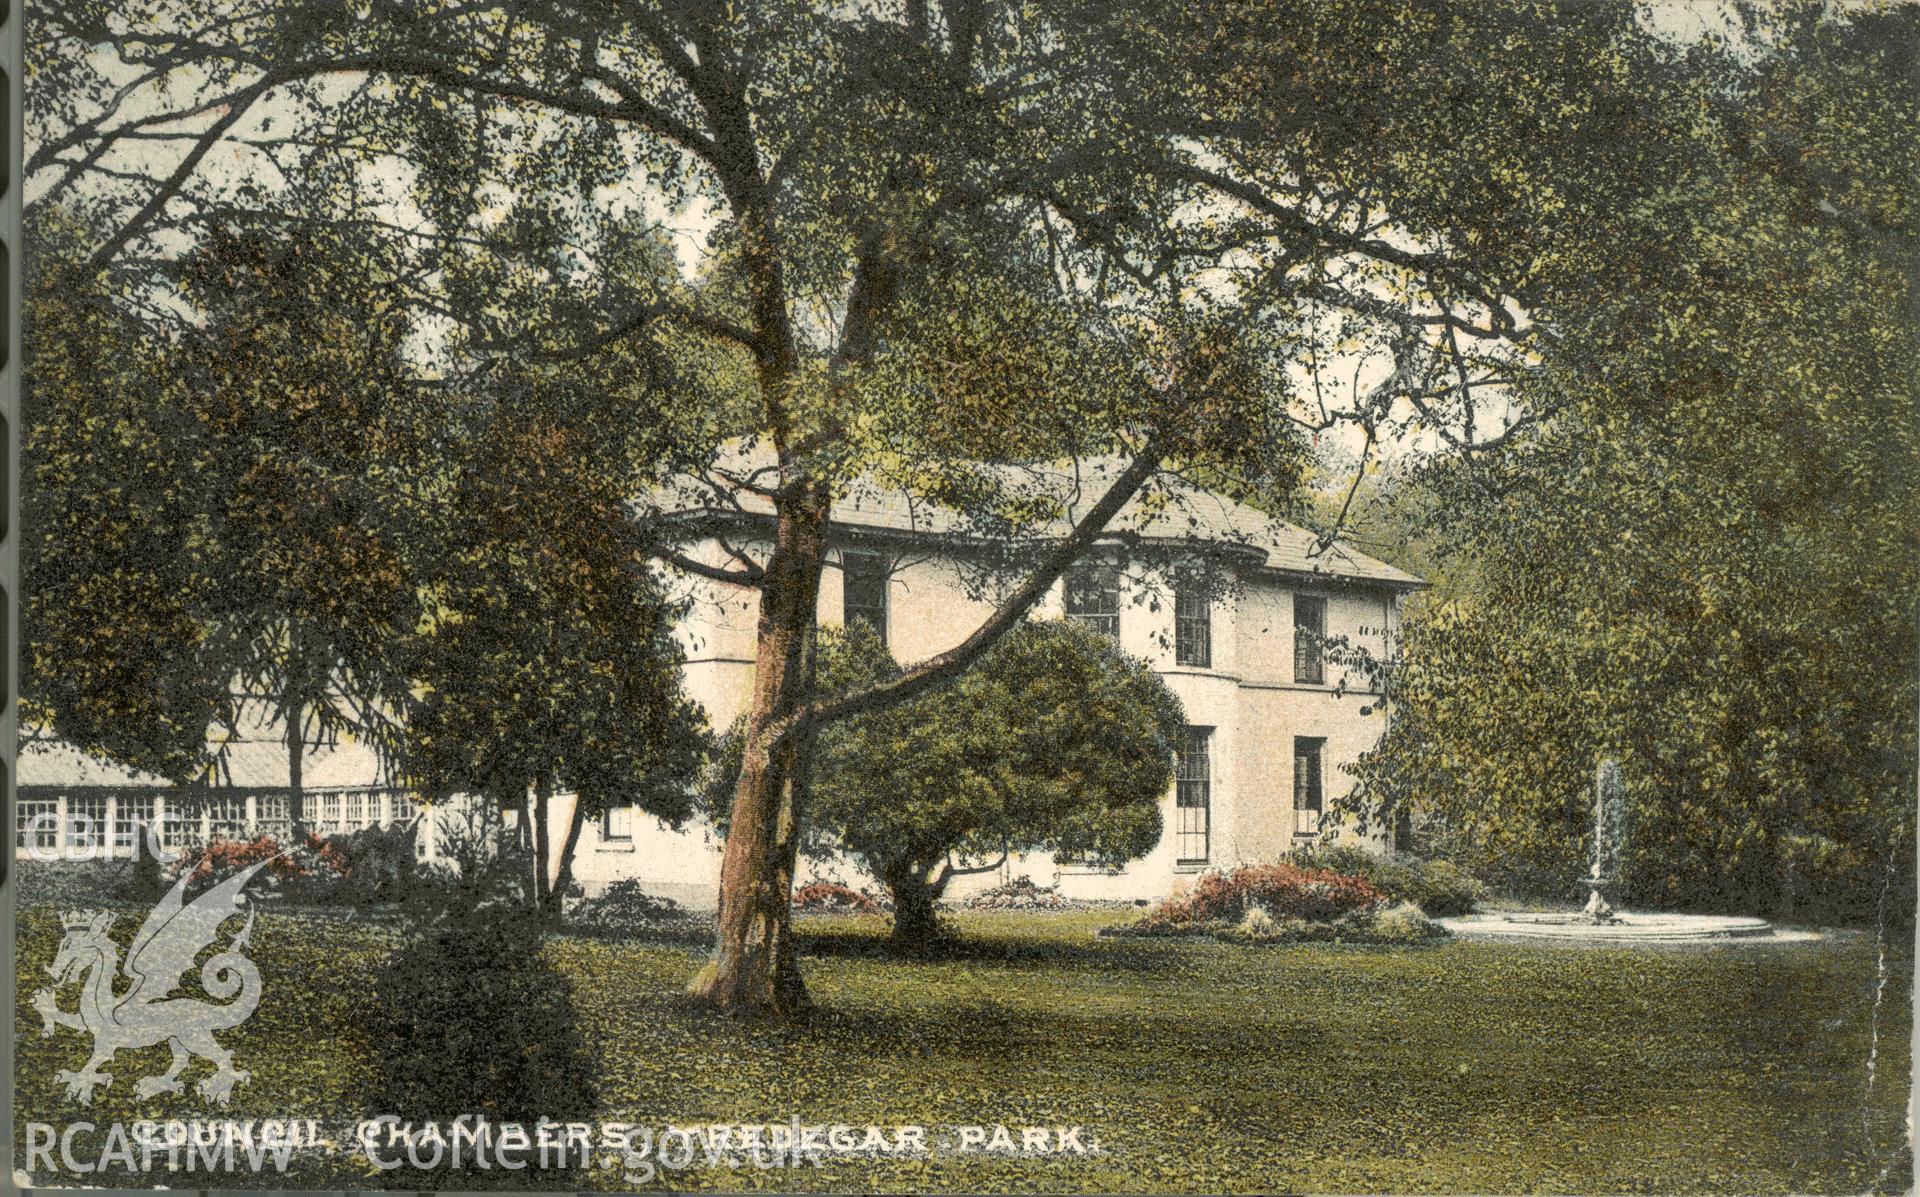 Digitised postcard image of Bedwellty House, Tredegar, E.G. Bowen, 22 Commercial Street, Tredegar. Produced by Parks and Gardens Data Services, from an original item in the Peter Davis Collection at Parks and Gardens UK. We hold only web-resolution images of this collection, suitable for viewing on screen and for research purposes only. We do not hold the original images, or publication quality scans.